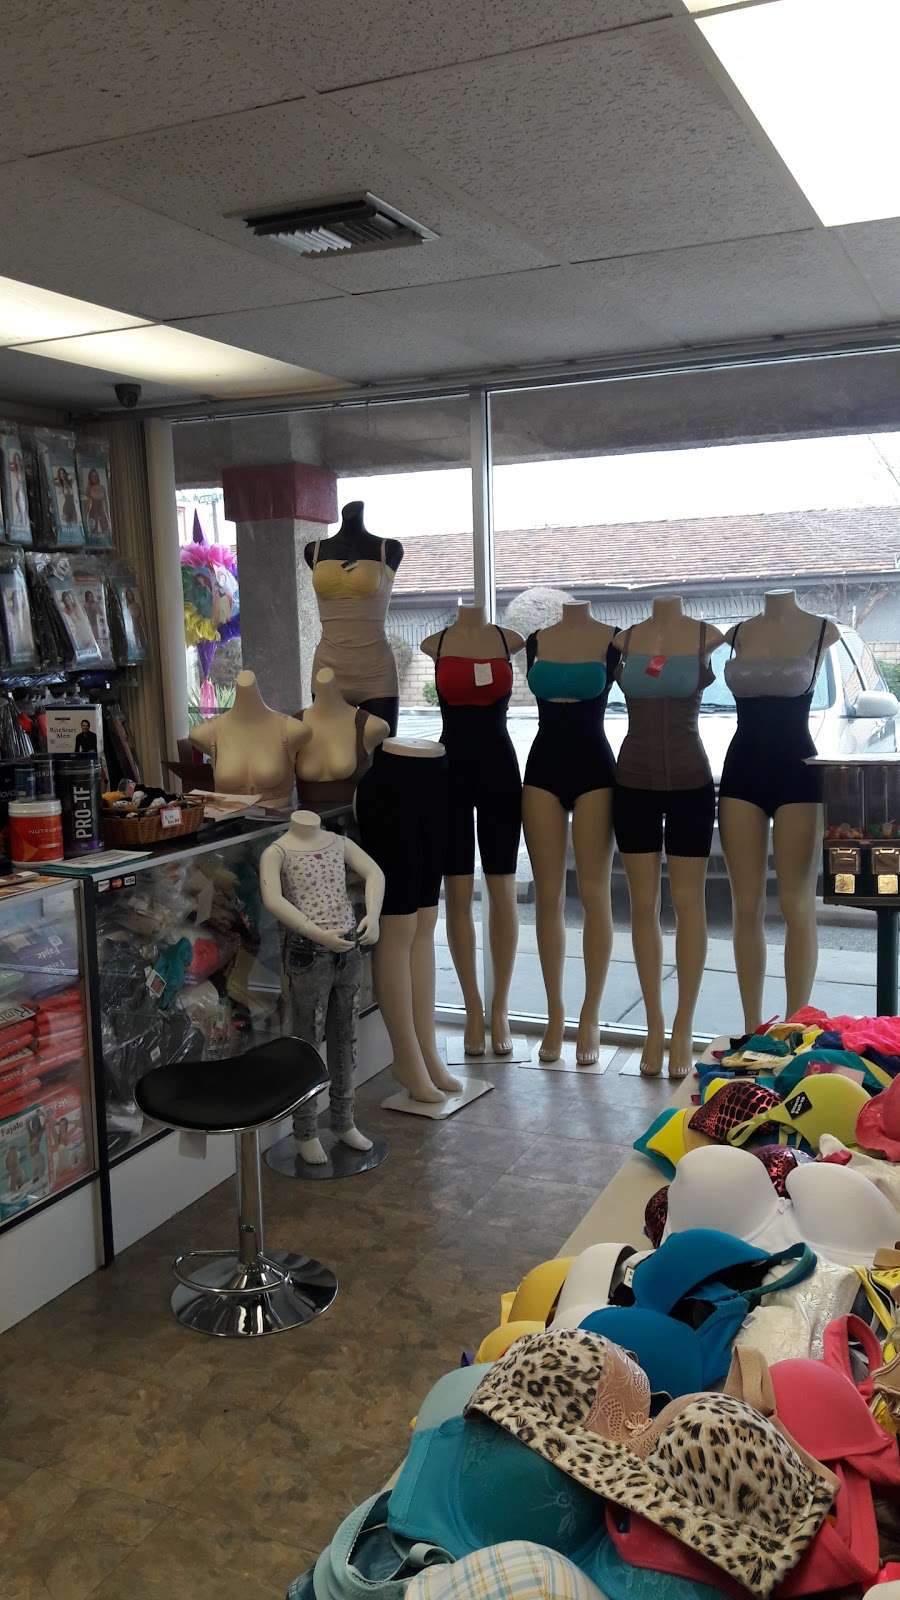 Graces Body Shapers and Lingerie | 2520 E Palmdale Blvd Suite C-5, Palmdale, CA 93550 | Phone: (818) 571-4944